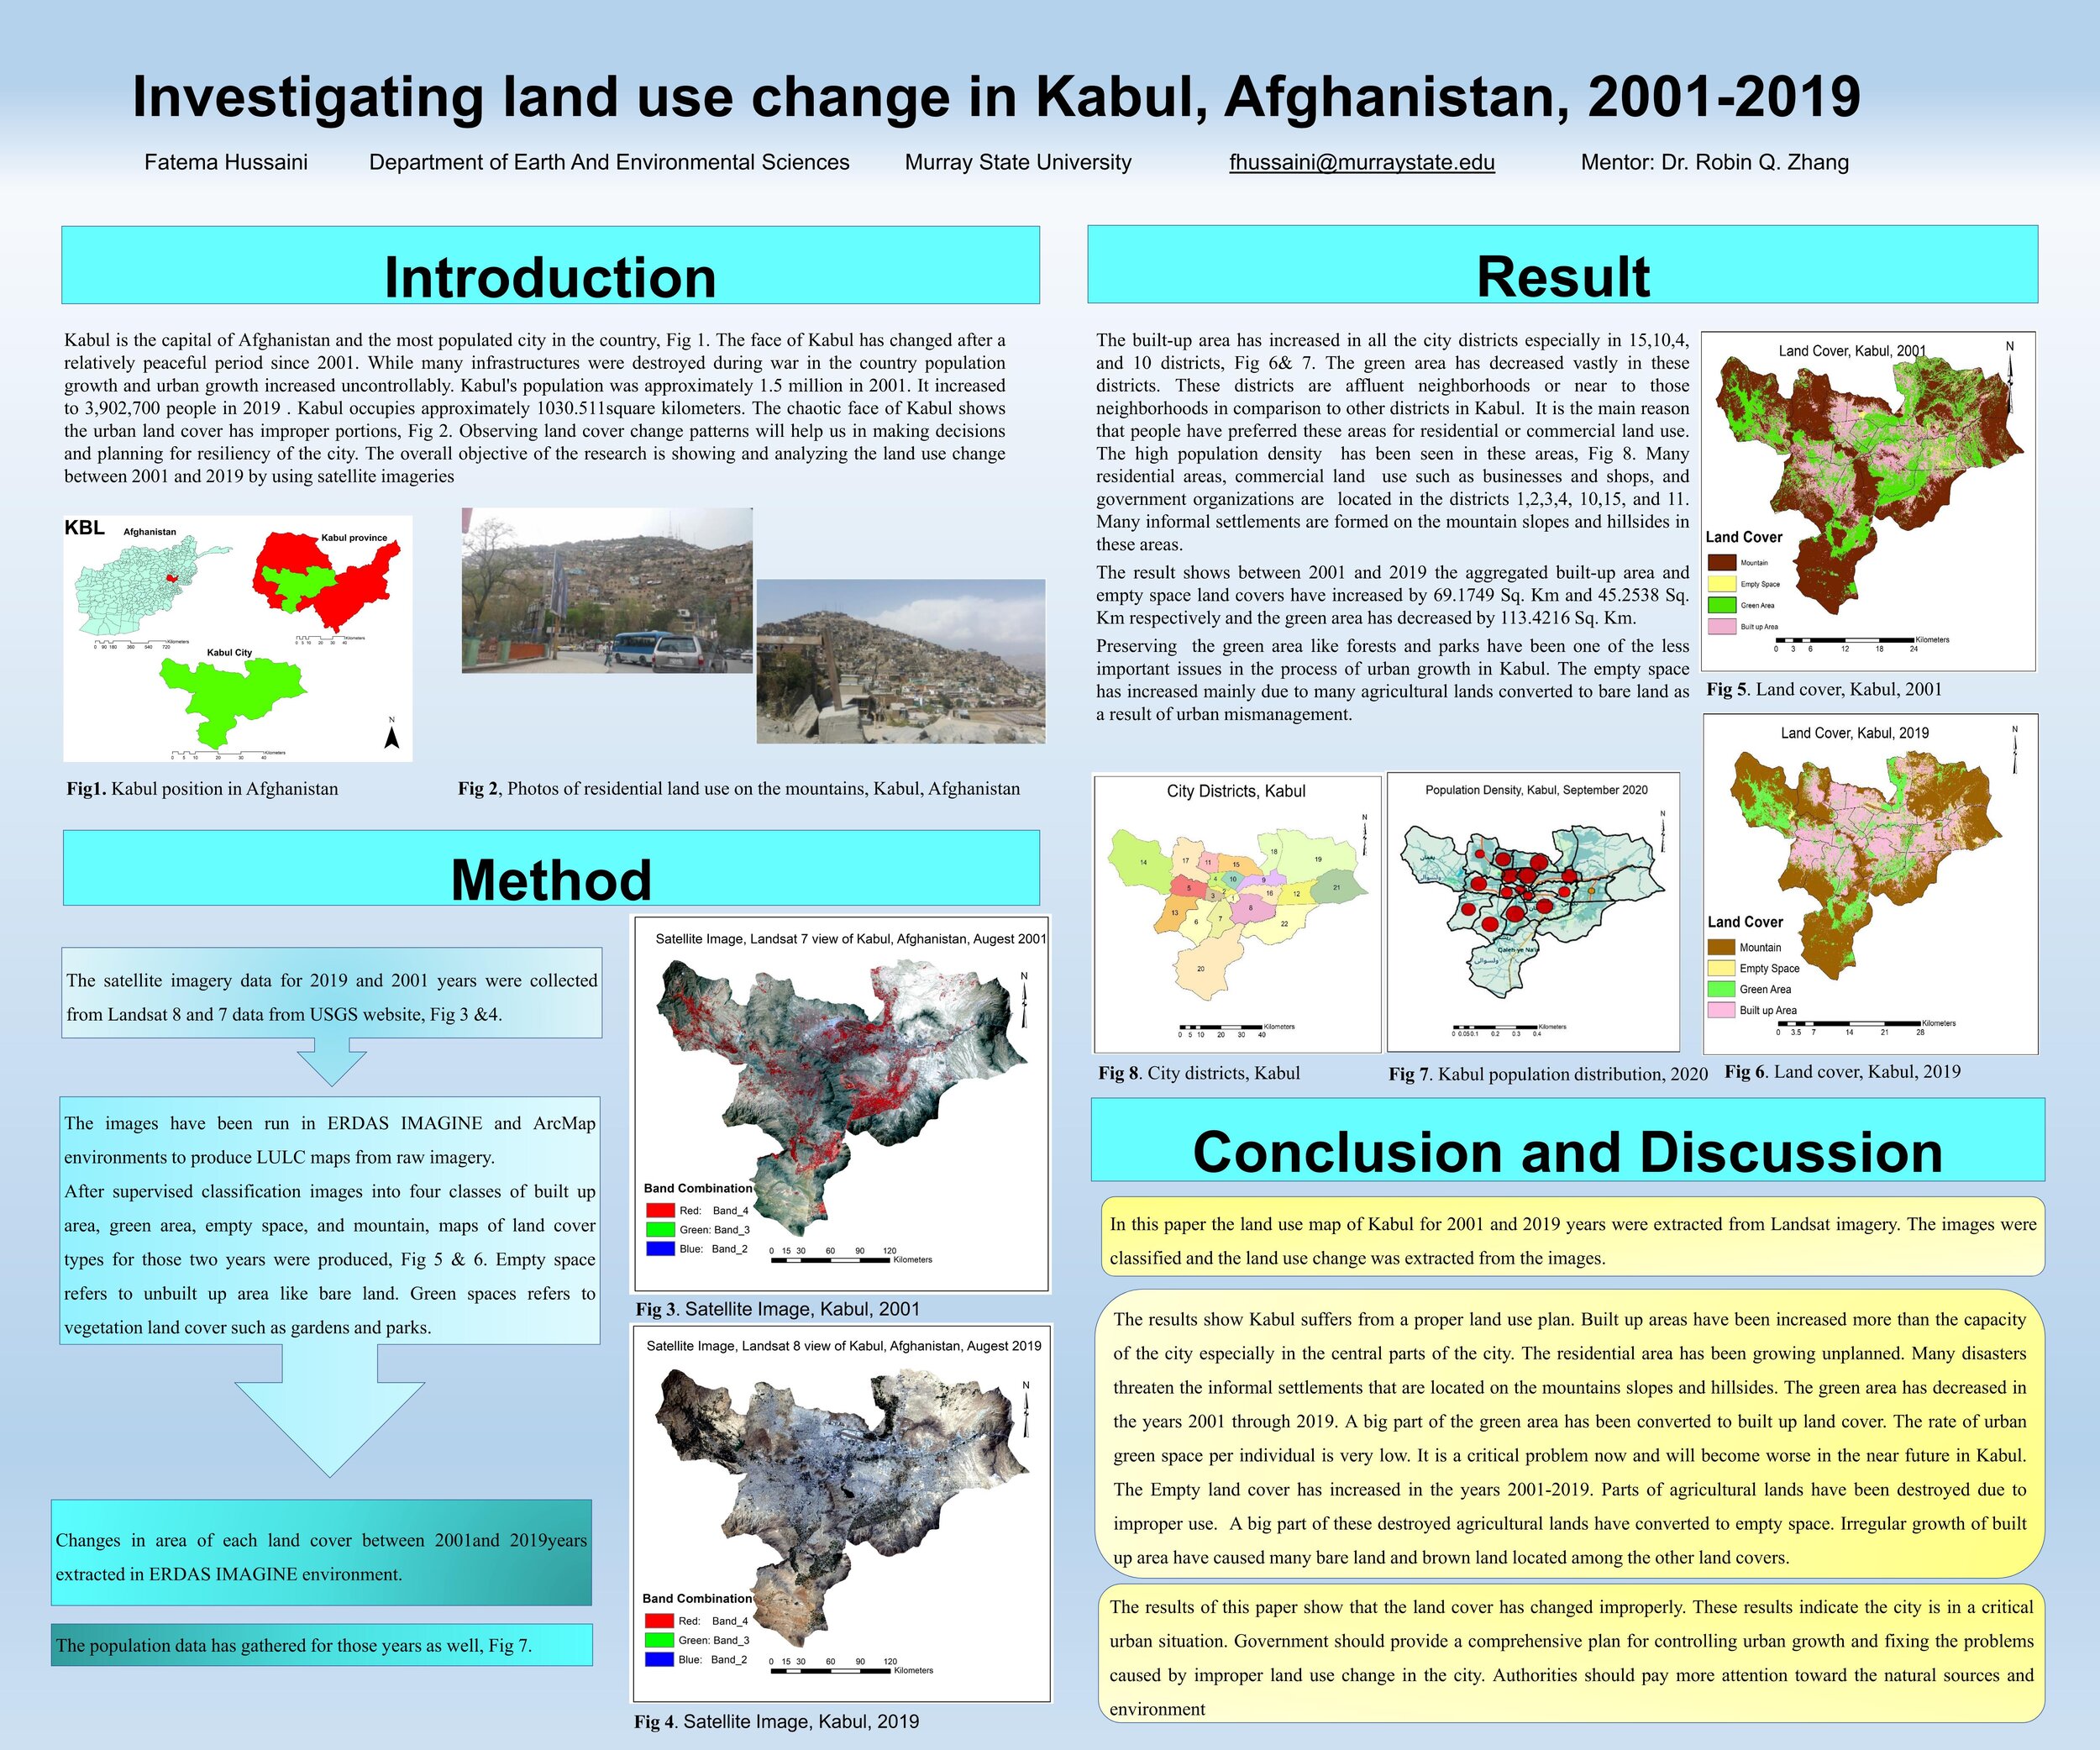 Investigating land use change in Kabul, Afghanistan, 2001-2019